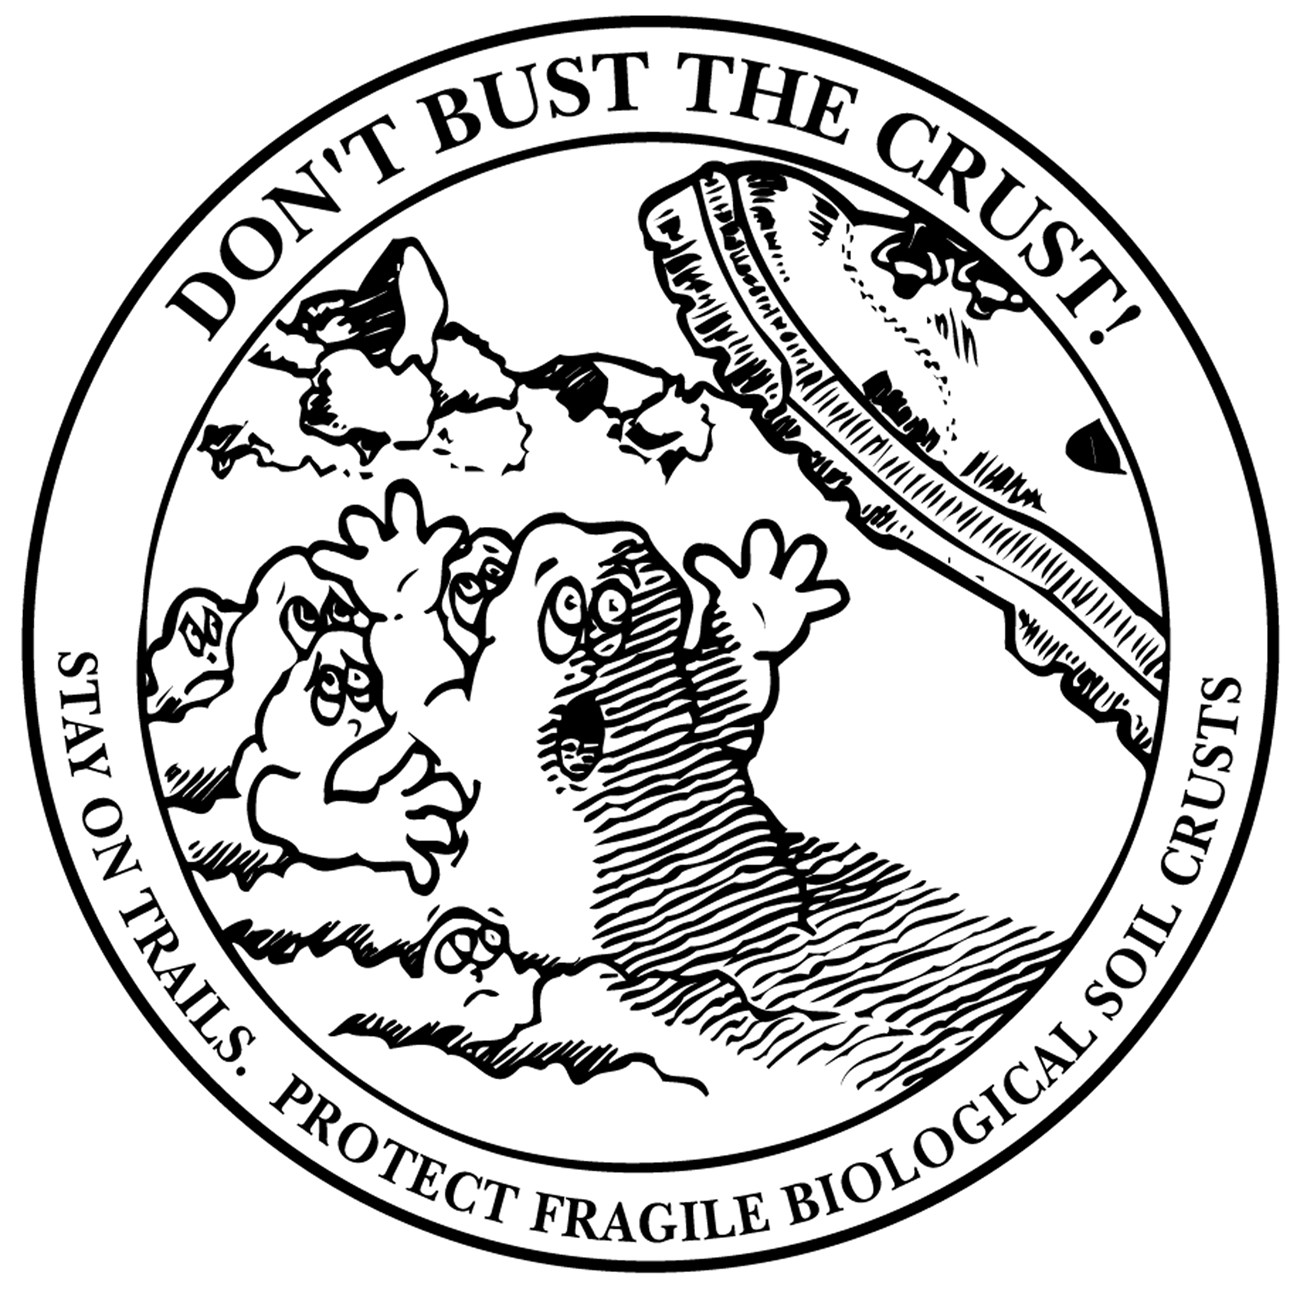 A line drawing of a hiking boot hovering over lumpy soil. The soil is personified with scared faces and arms in the air. Text encircles the image, reading "Don't bust the crust! Stay on trails. Protect fragile biological soil crusts."